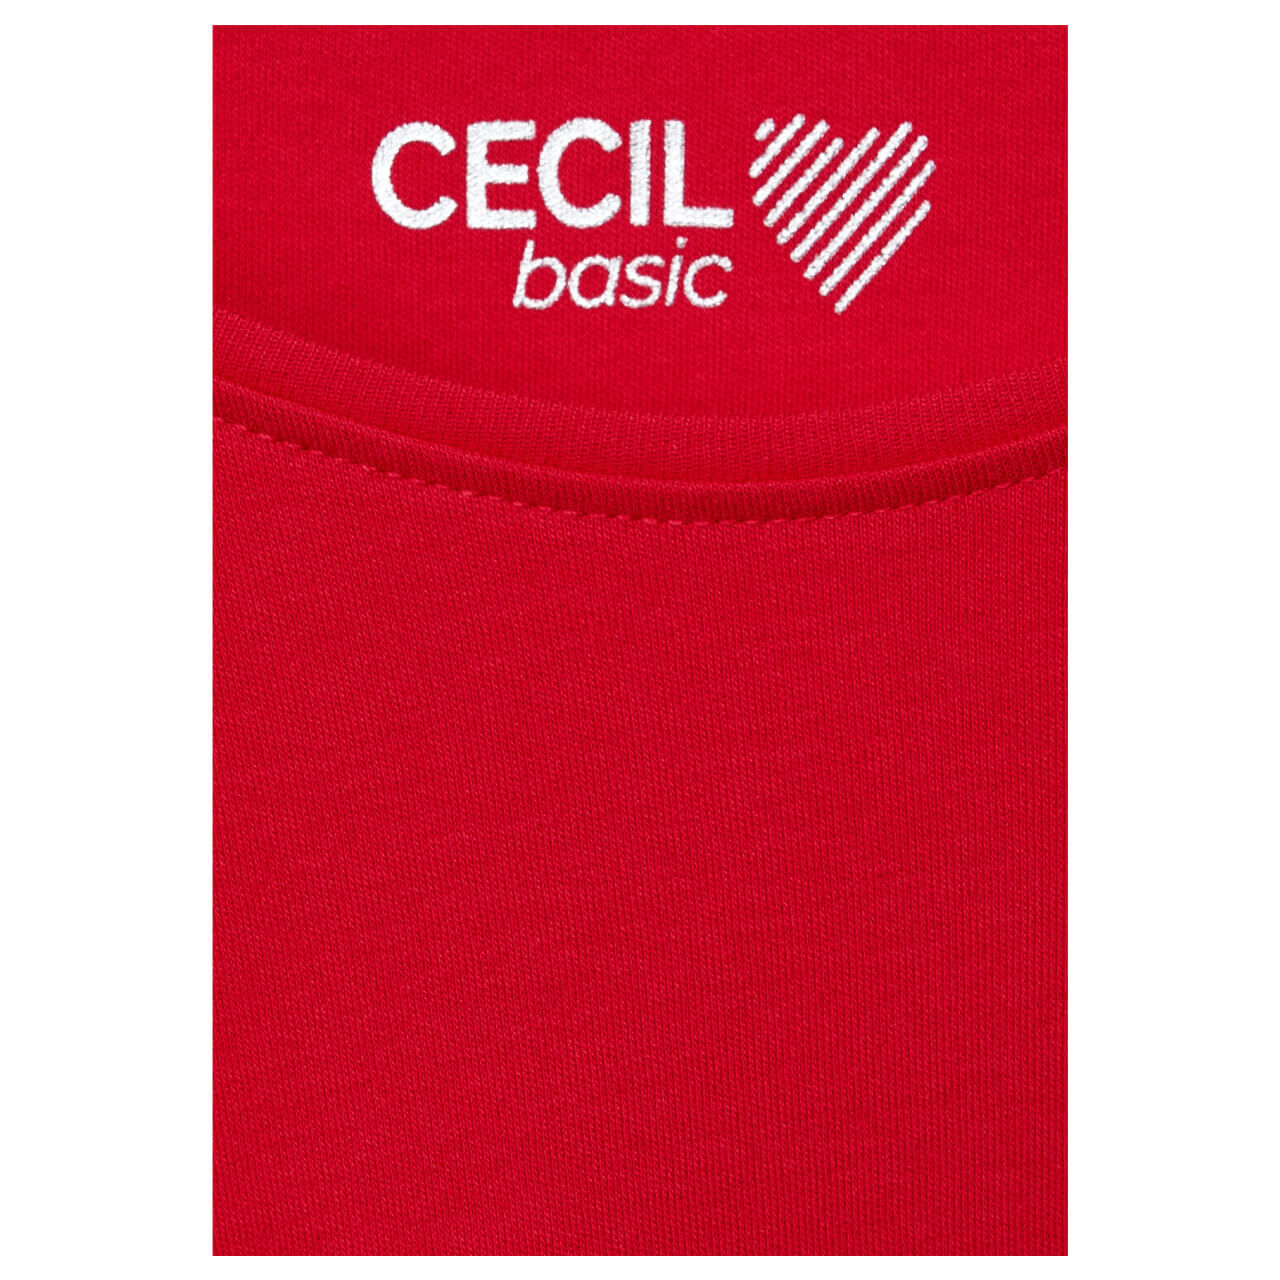 Cecil Pia Langarm Shirt strong red